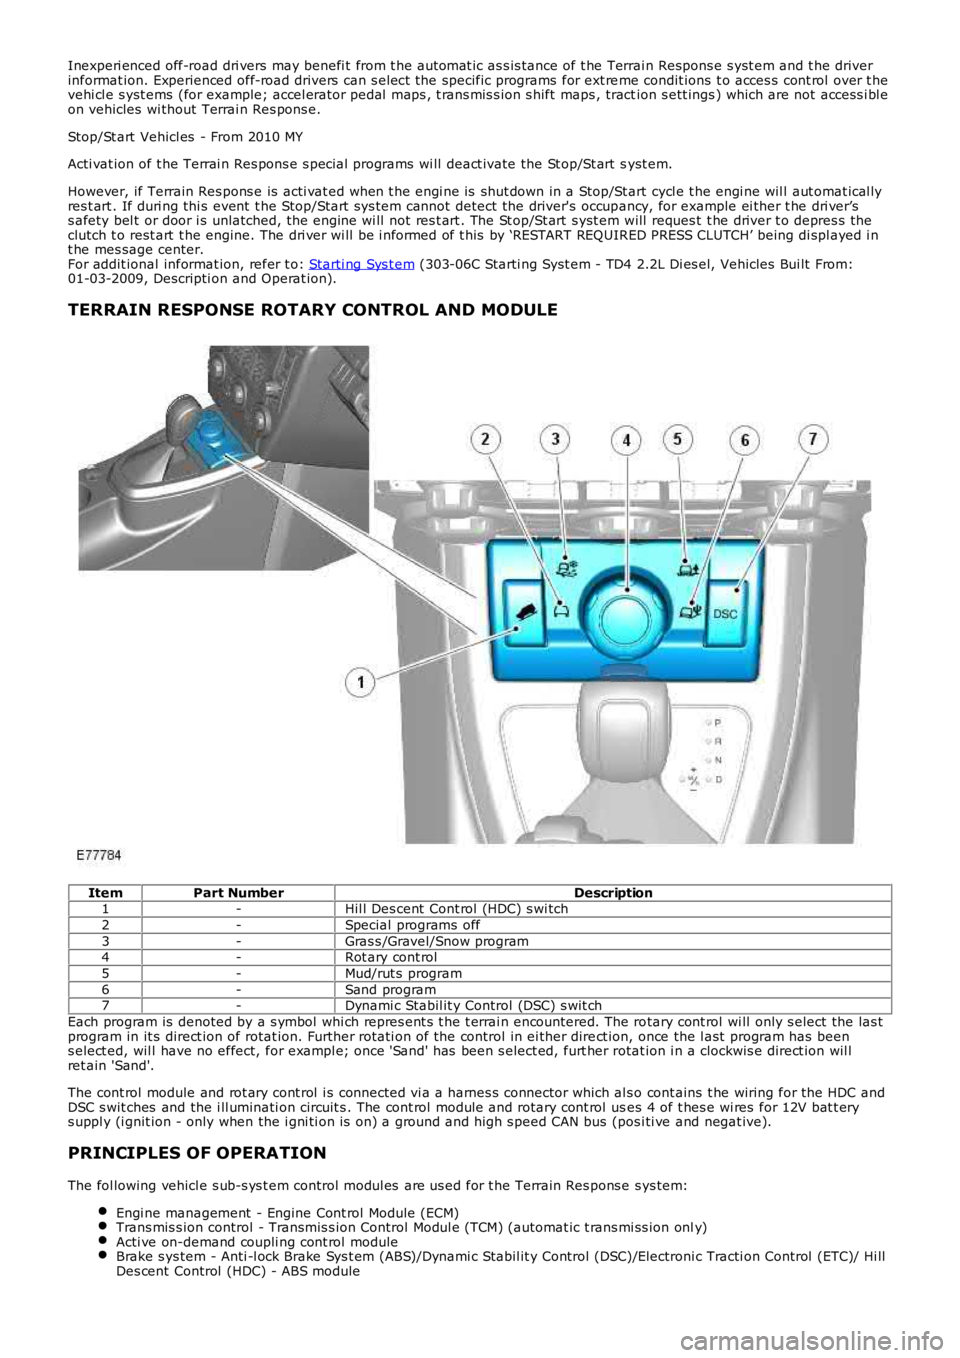 LAND ROVER FRELANDER 2 2006  Repair Manual Inexperi enced off-road dri vers  may benefi t from t he automat ic as s is tance of t he Terrai n Respons e s yst em and t he driverinformat ion. Experienced off-road drivers  can s elect the specifi